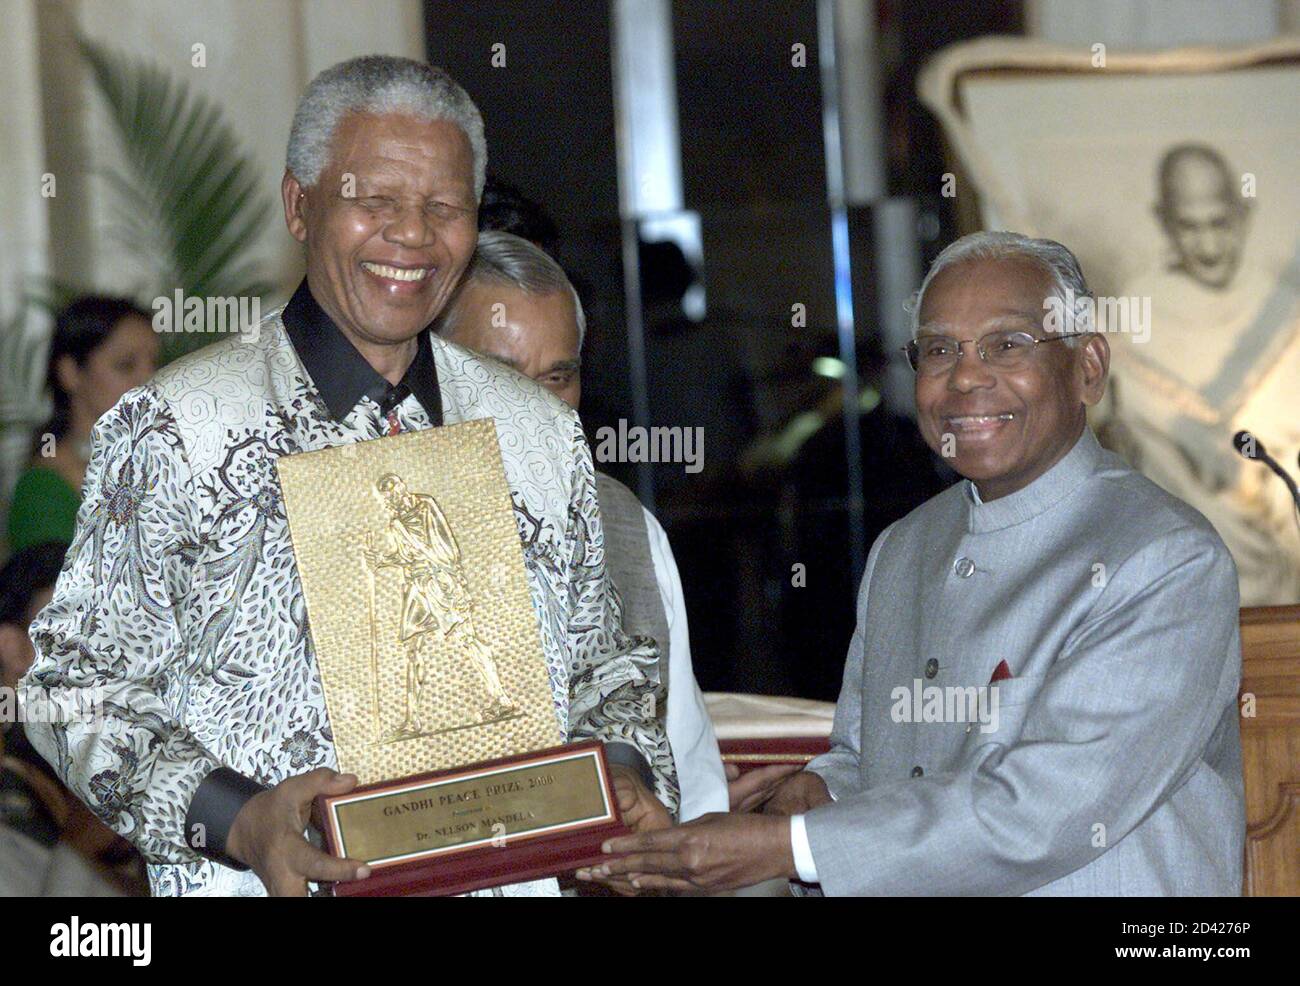 Former South Africa's president Nelson Mandela (L) receives the Gandhi Peace  Prize from Indian President Koscheril Raman Narayanan in New Delhi March  16, 2001. Mandela received the 10-million rupee ($217,391) price for